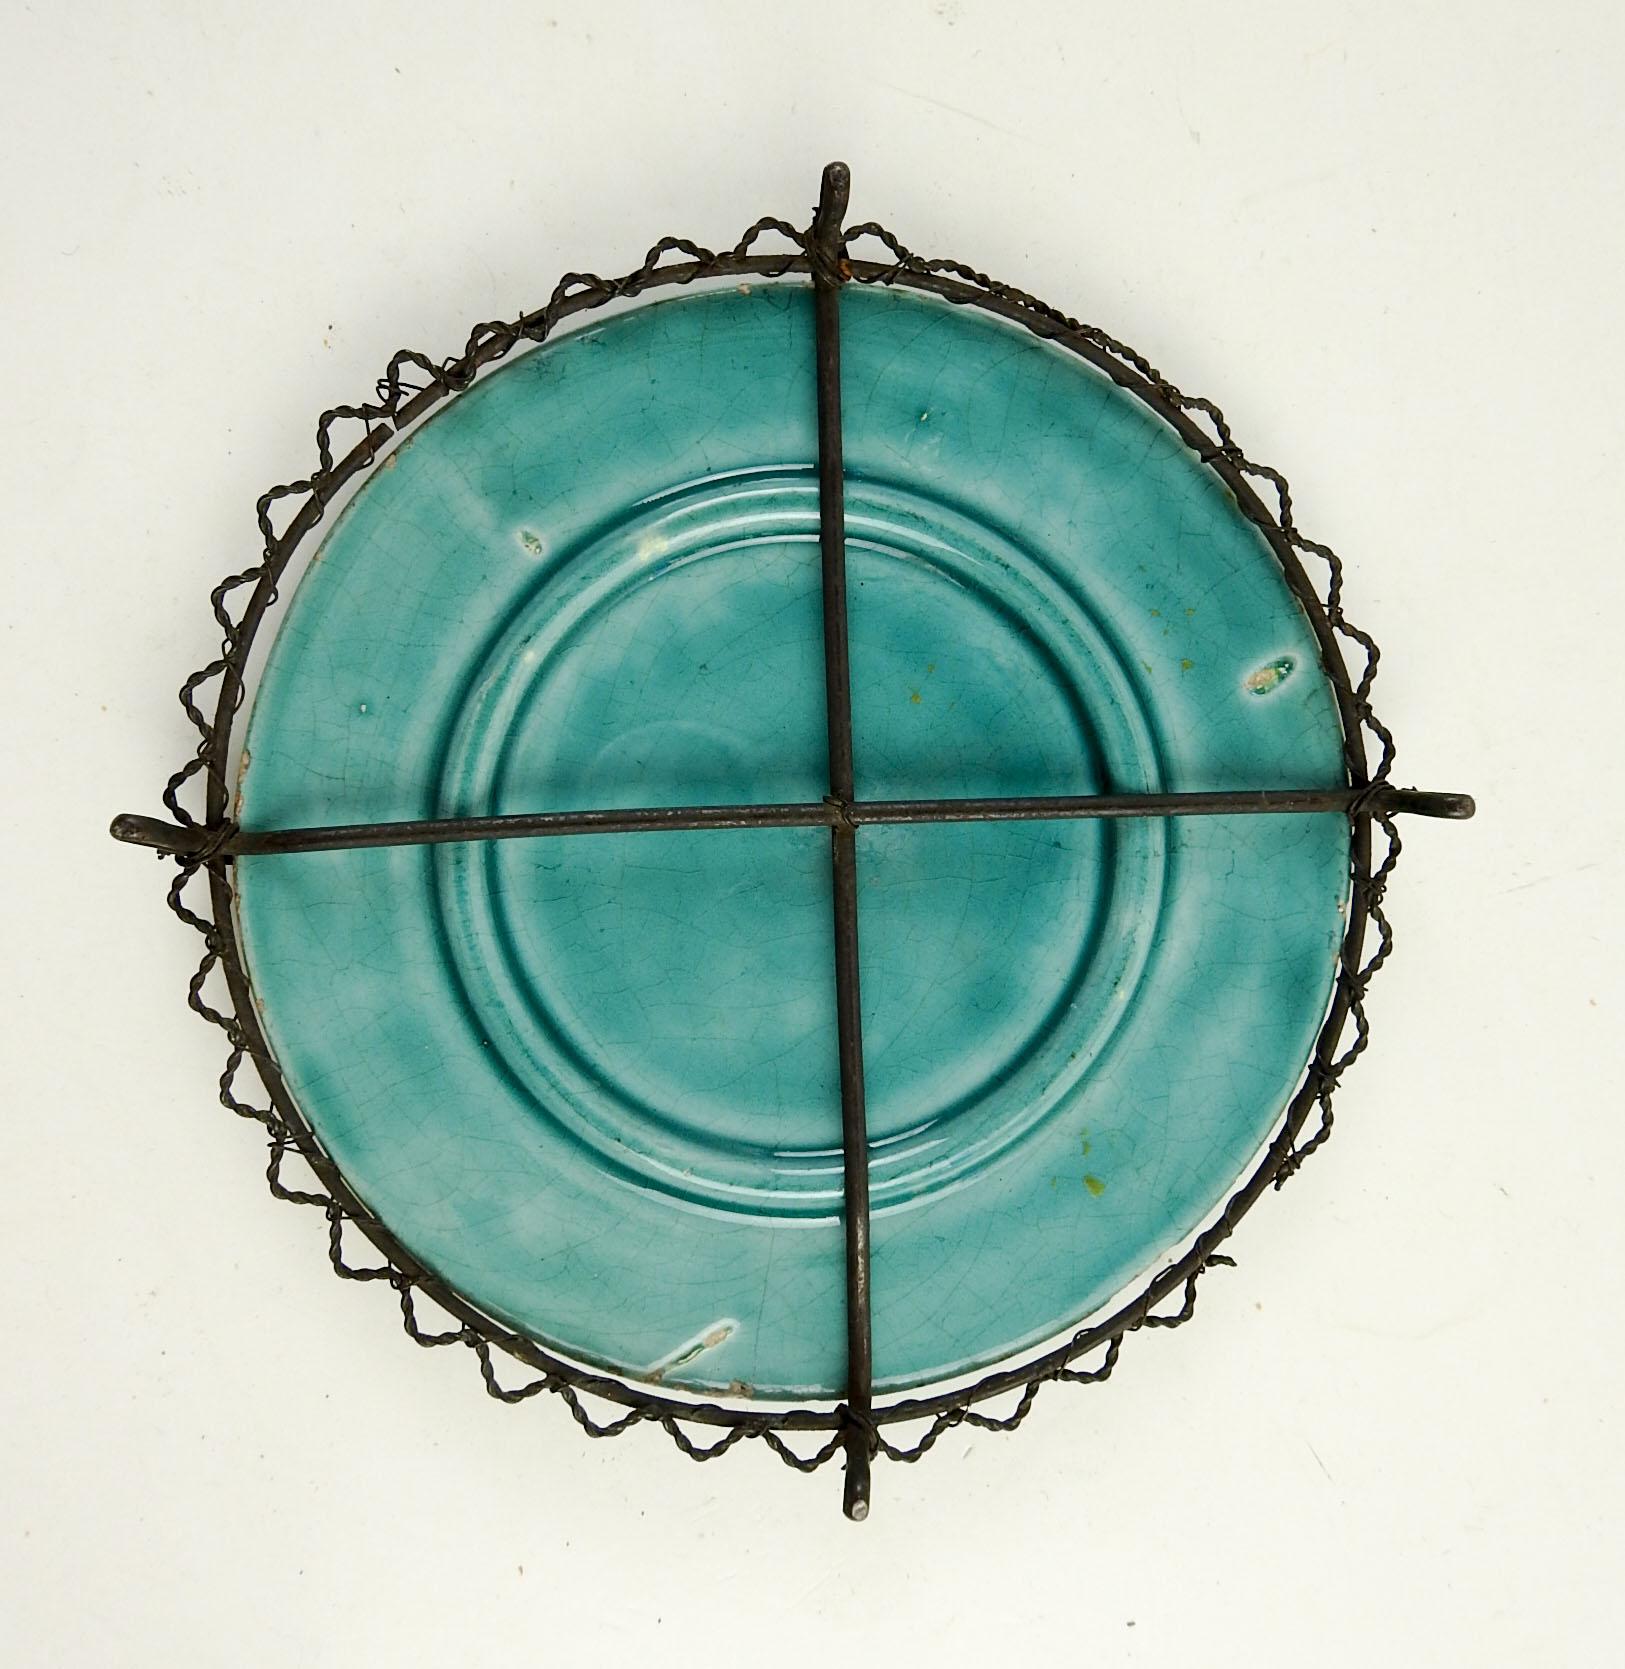 Turquoise majolica plate with boy catching a butterfly. Wrapped in wire with feet to use as a trivet or stand. No markings, small break in wire, surface wear to glaze.